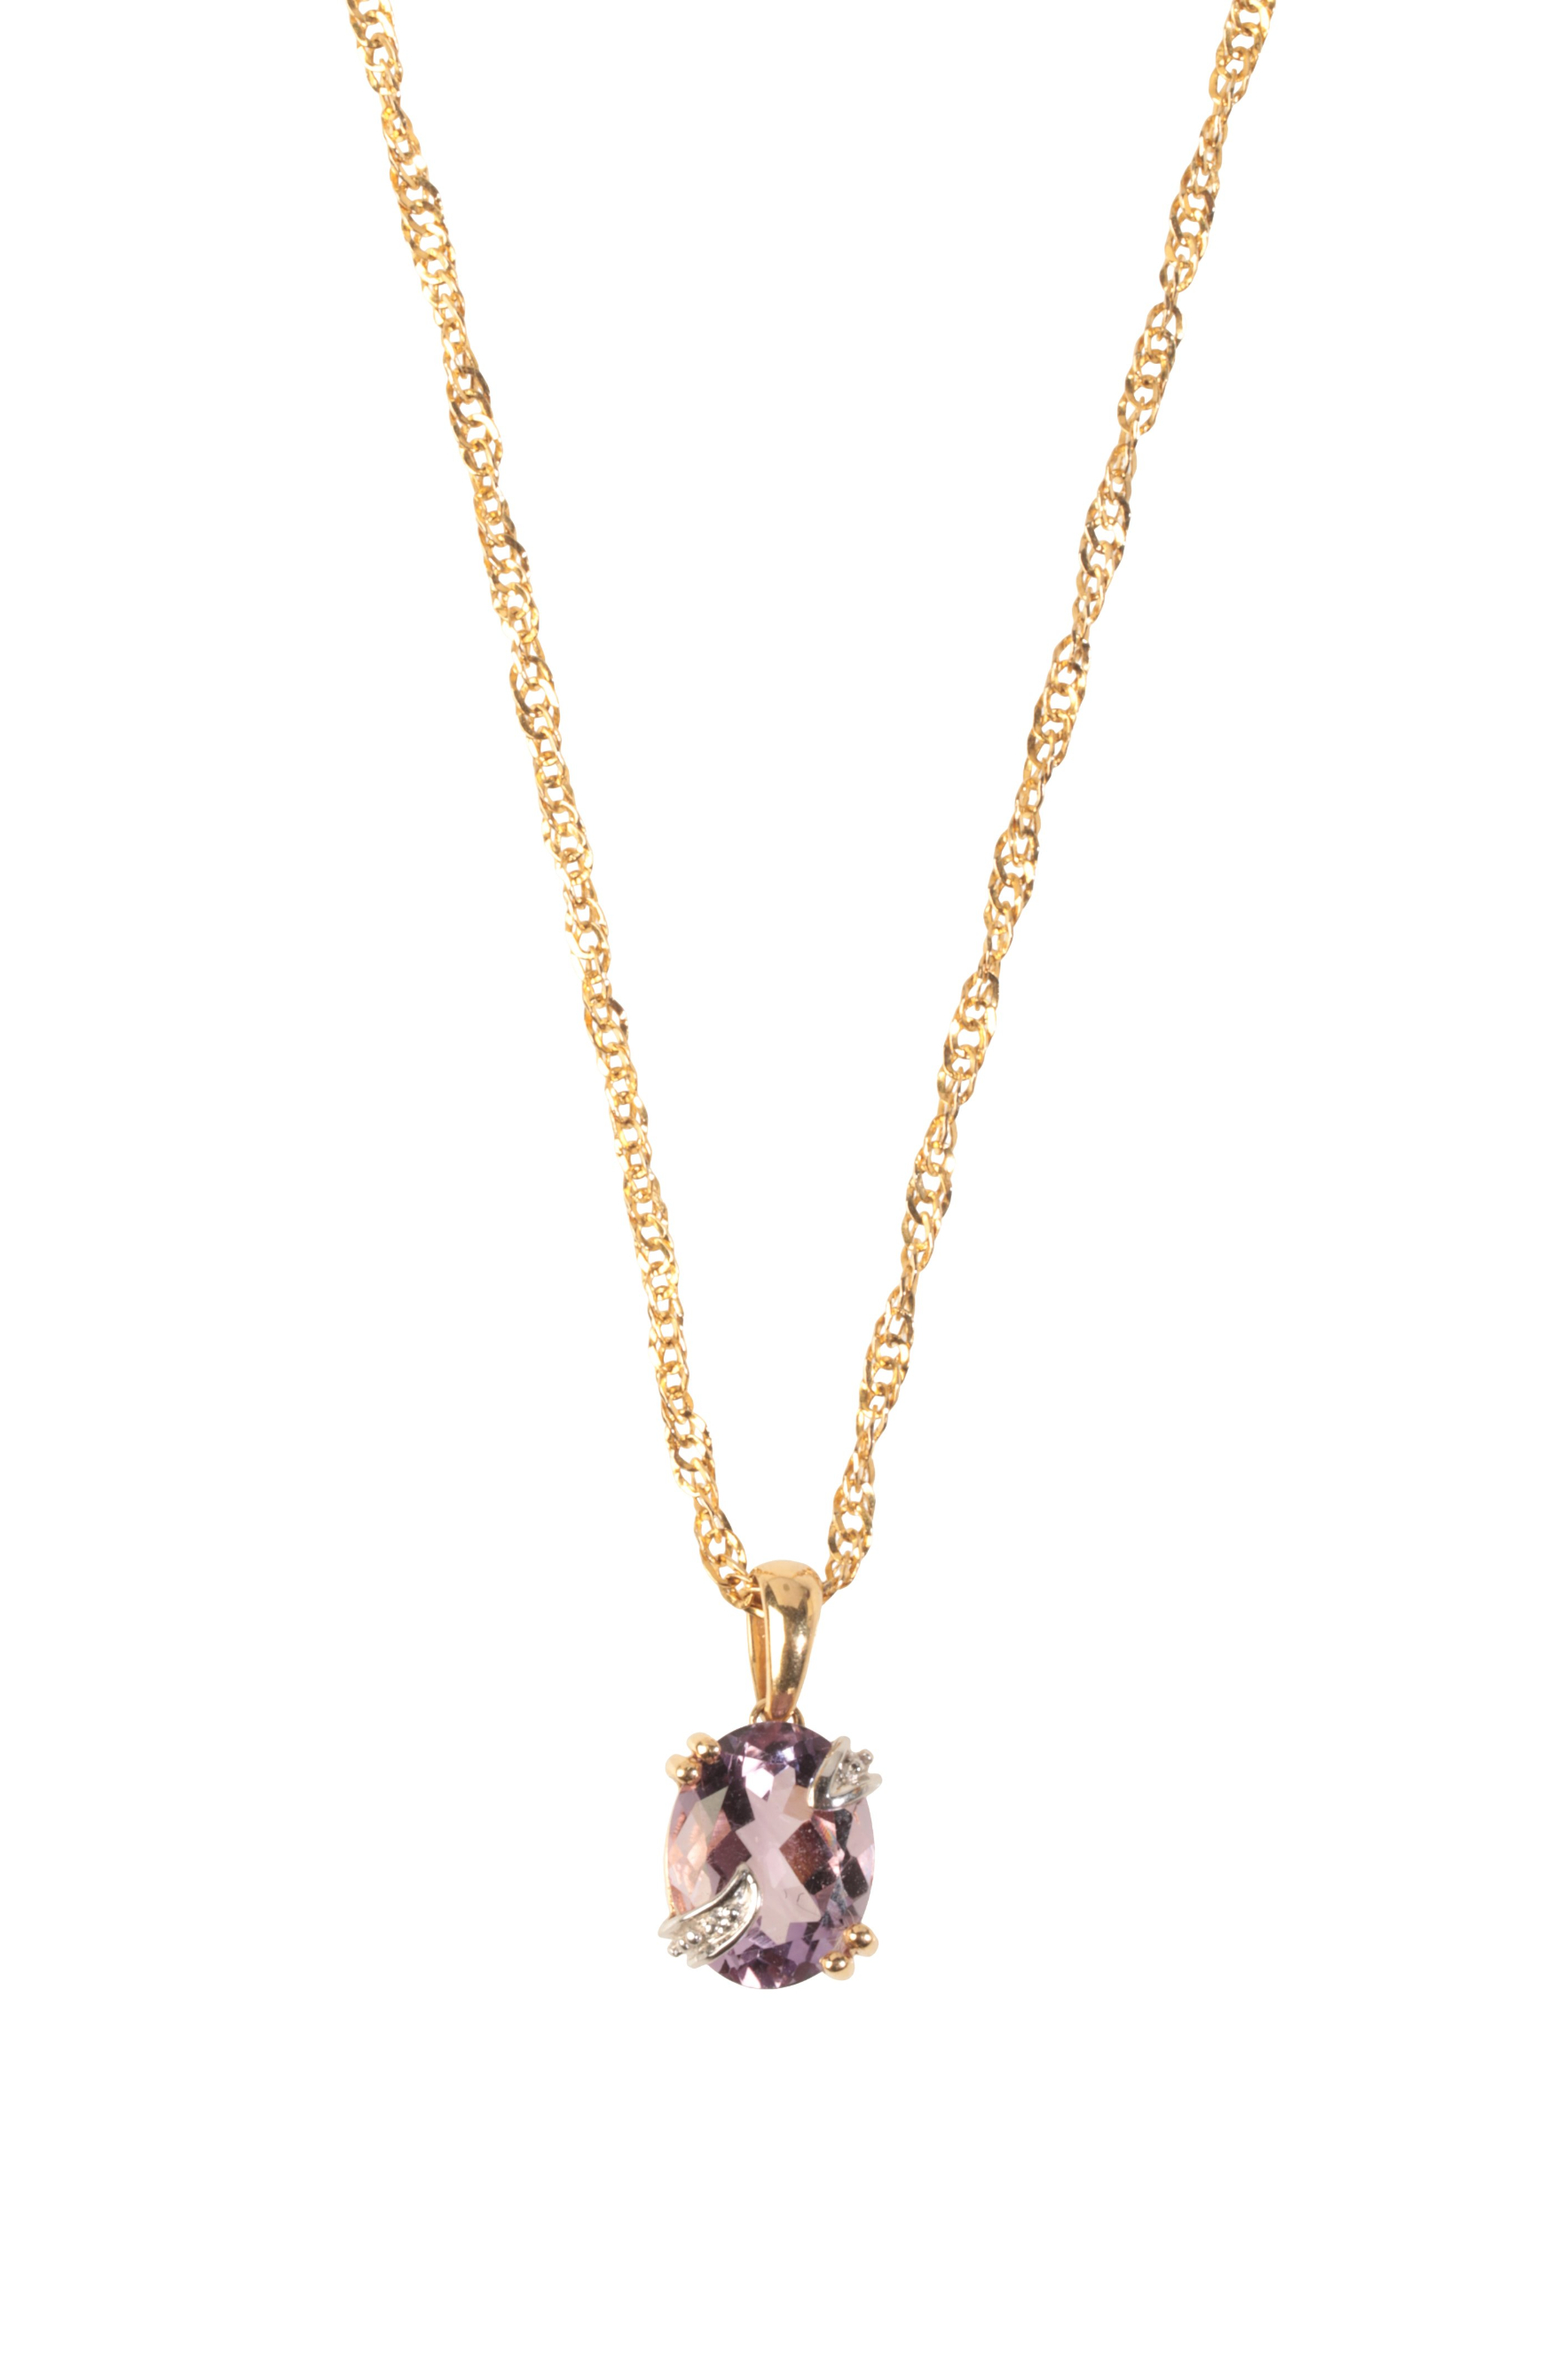 AN AMETHYST AND DIAMOND PENDANT NECKLACE - Image 2 of 2